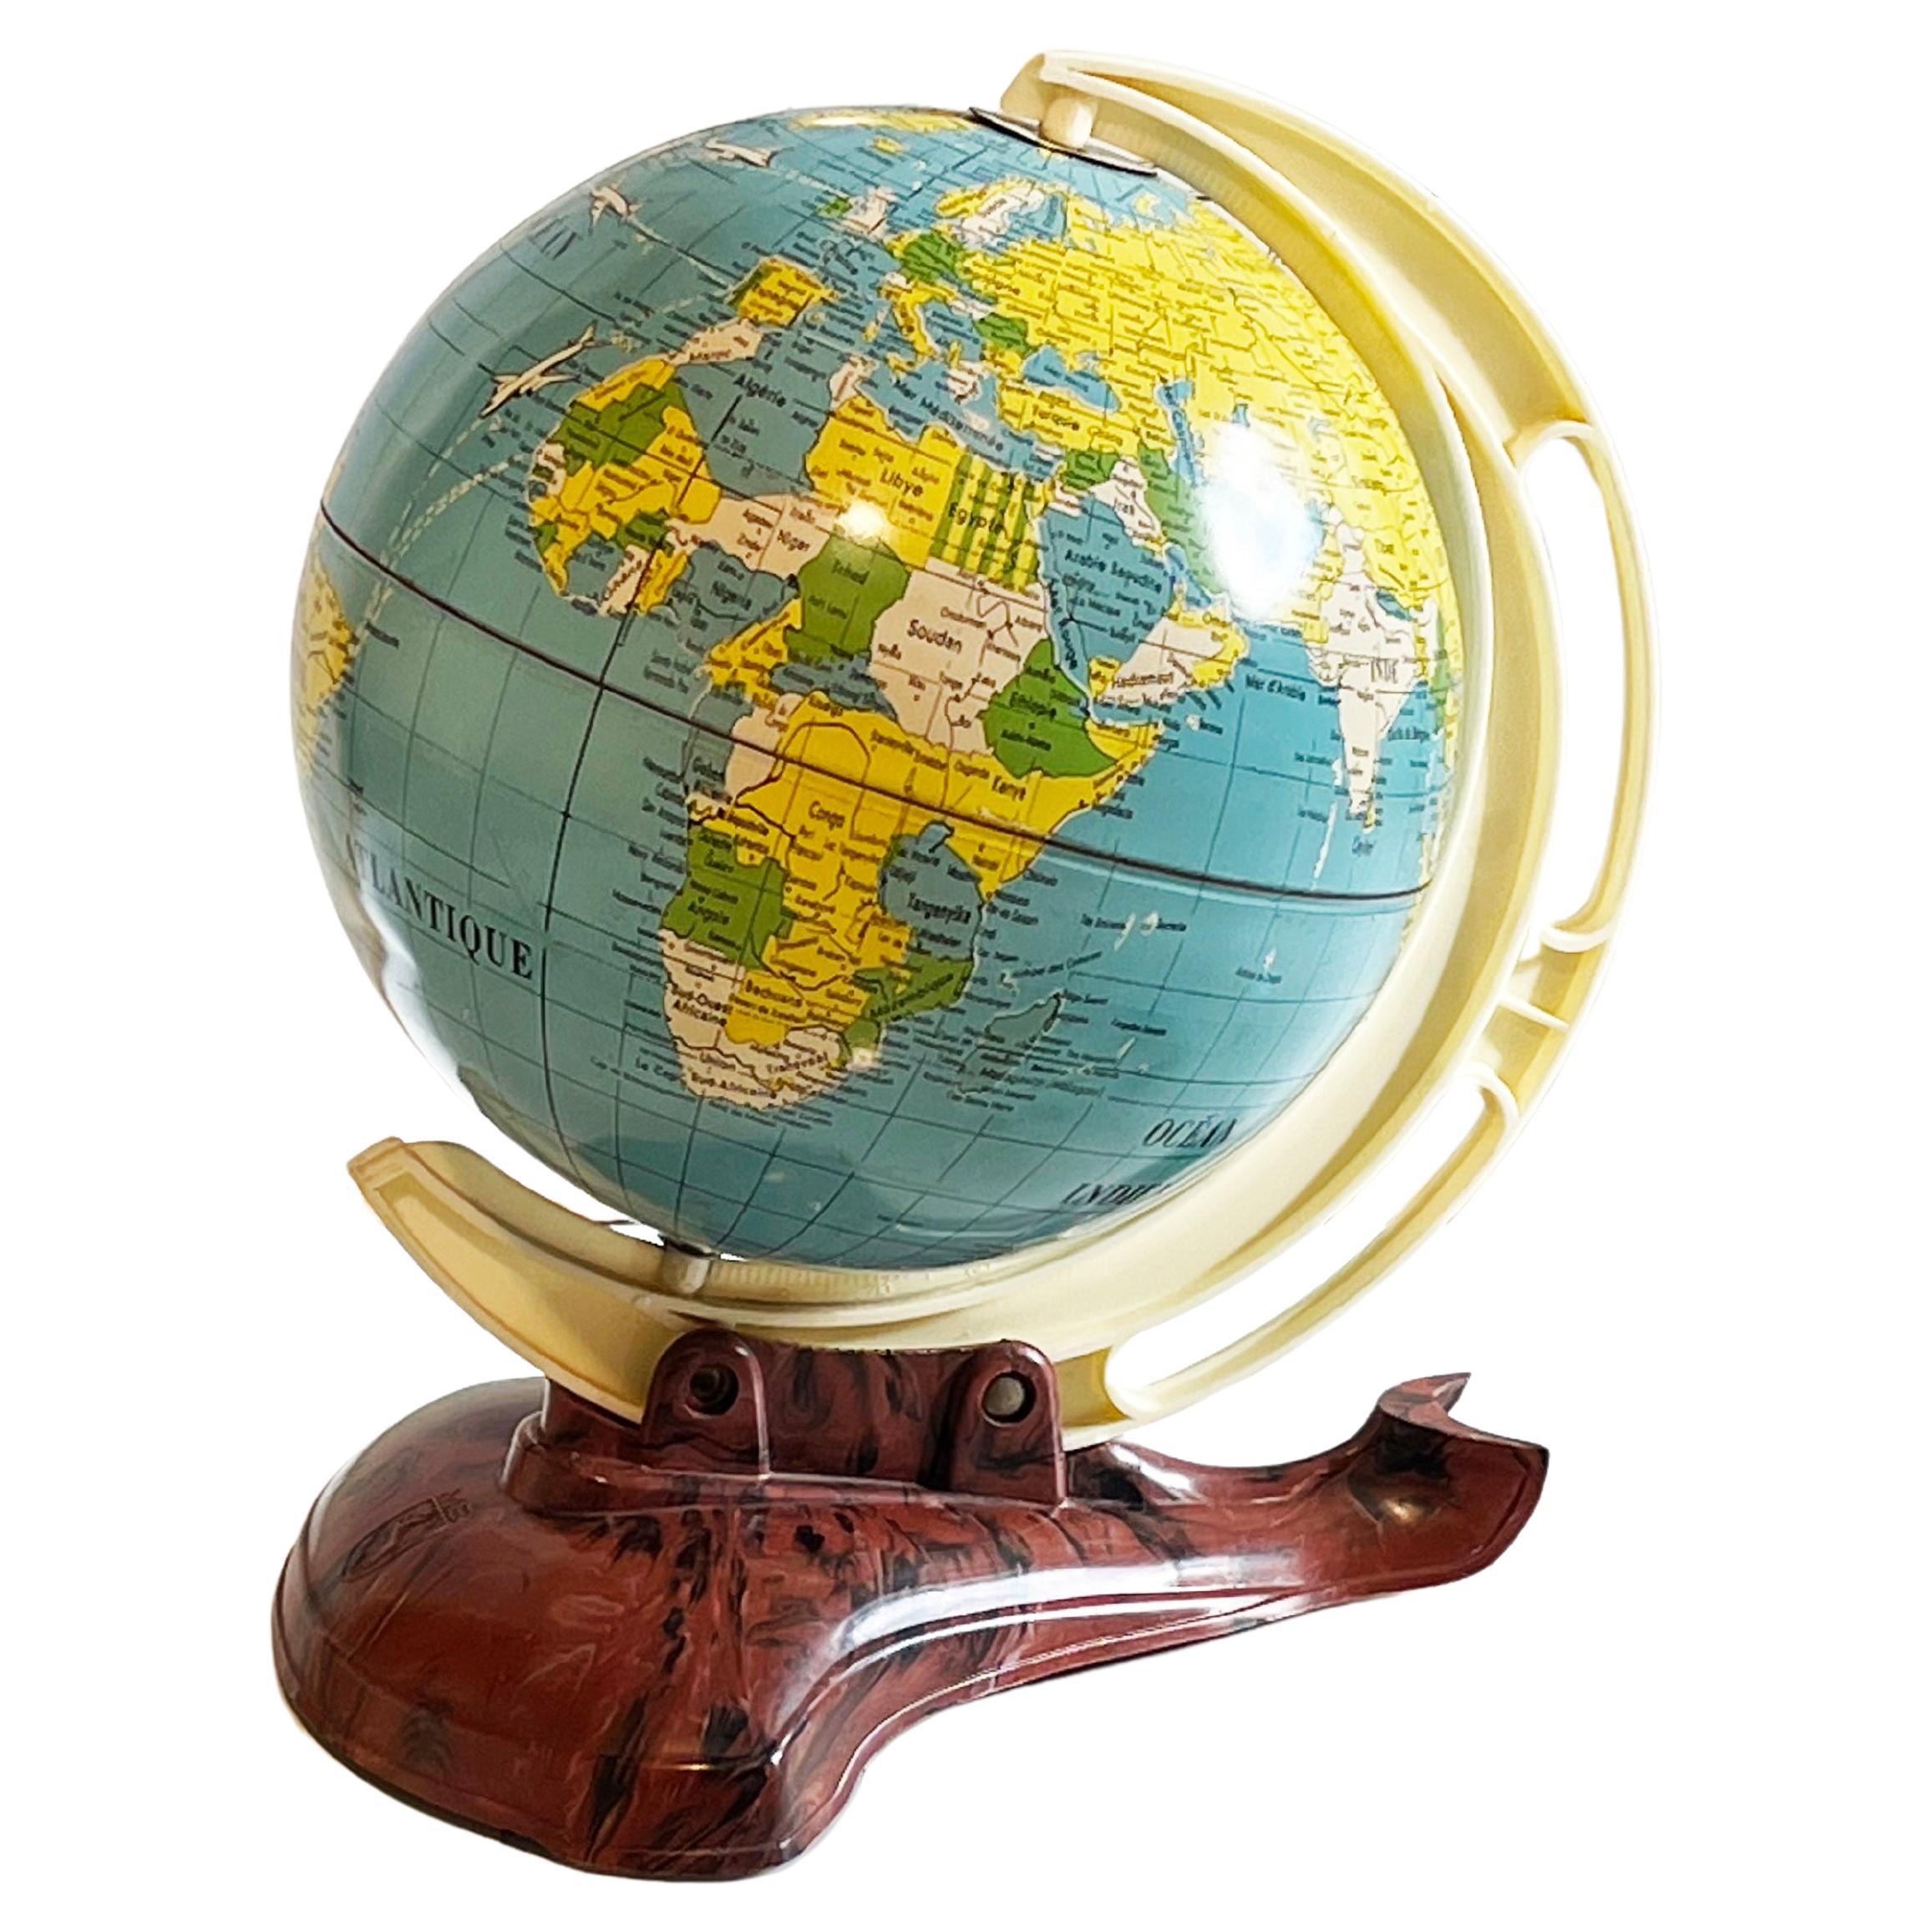 Wonderful find, labeled in French and made for Belgium:
by MS (Michael Seidel, Western Germany). This tin globe was made around 1951 and lithography / screen printed.
Classic tin toy from the mid-20th century in wonderful vintage